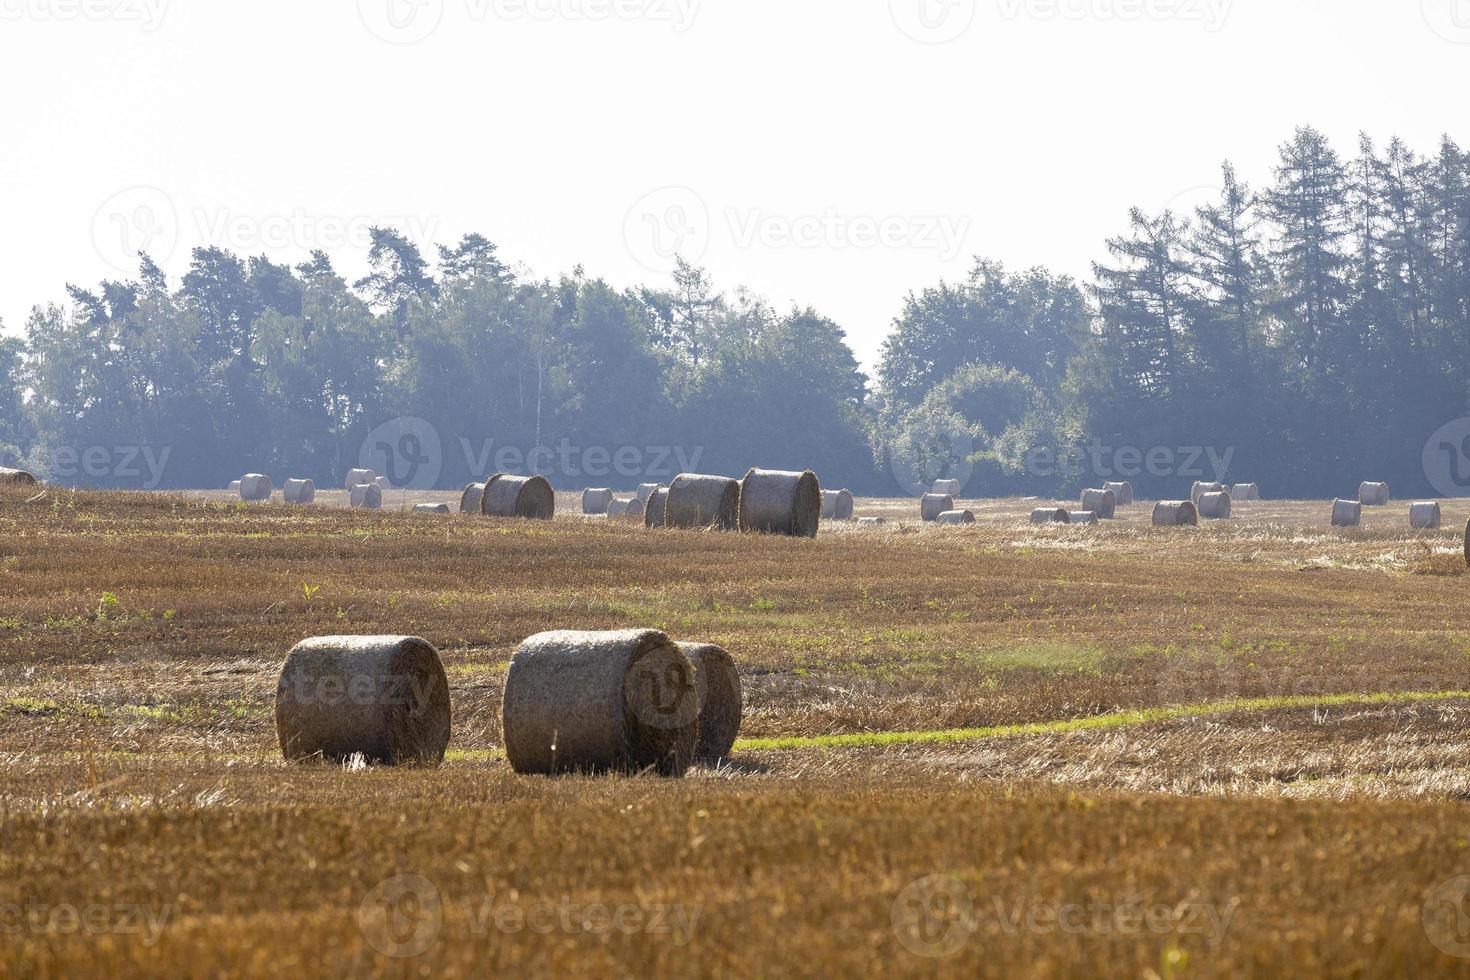 Straw stack after harvesting grain in the field photo